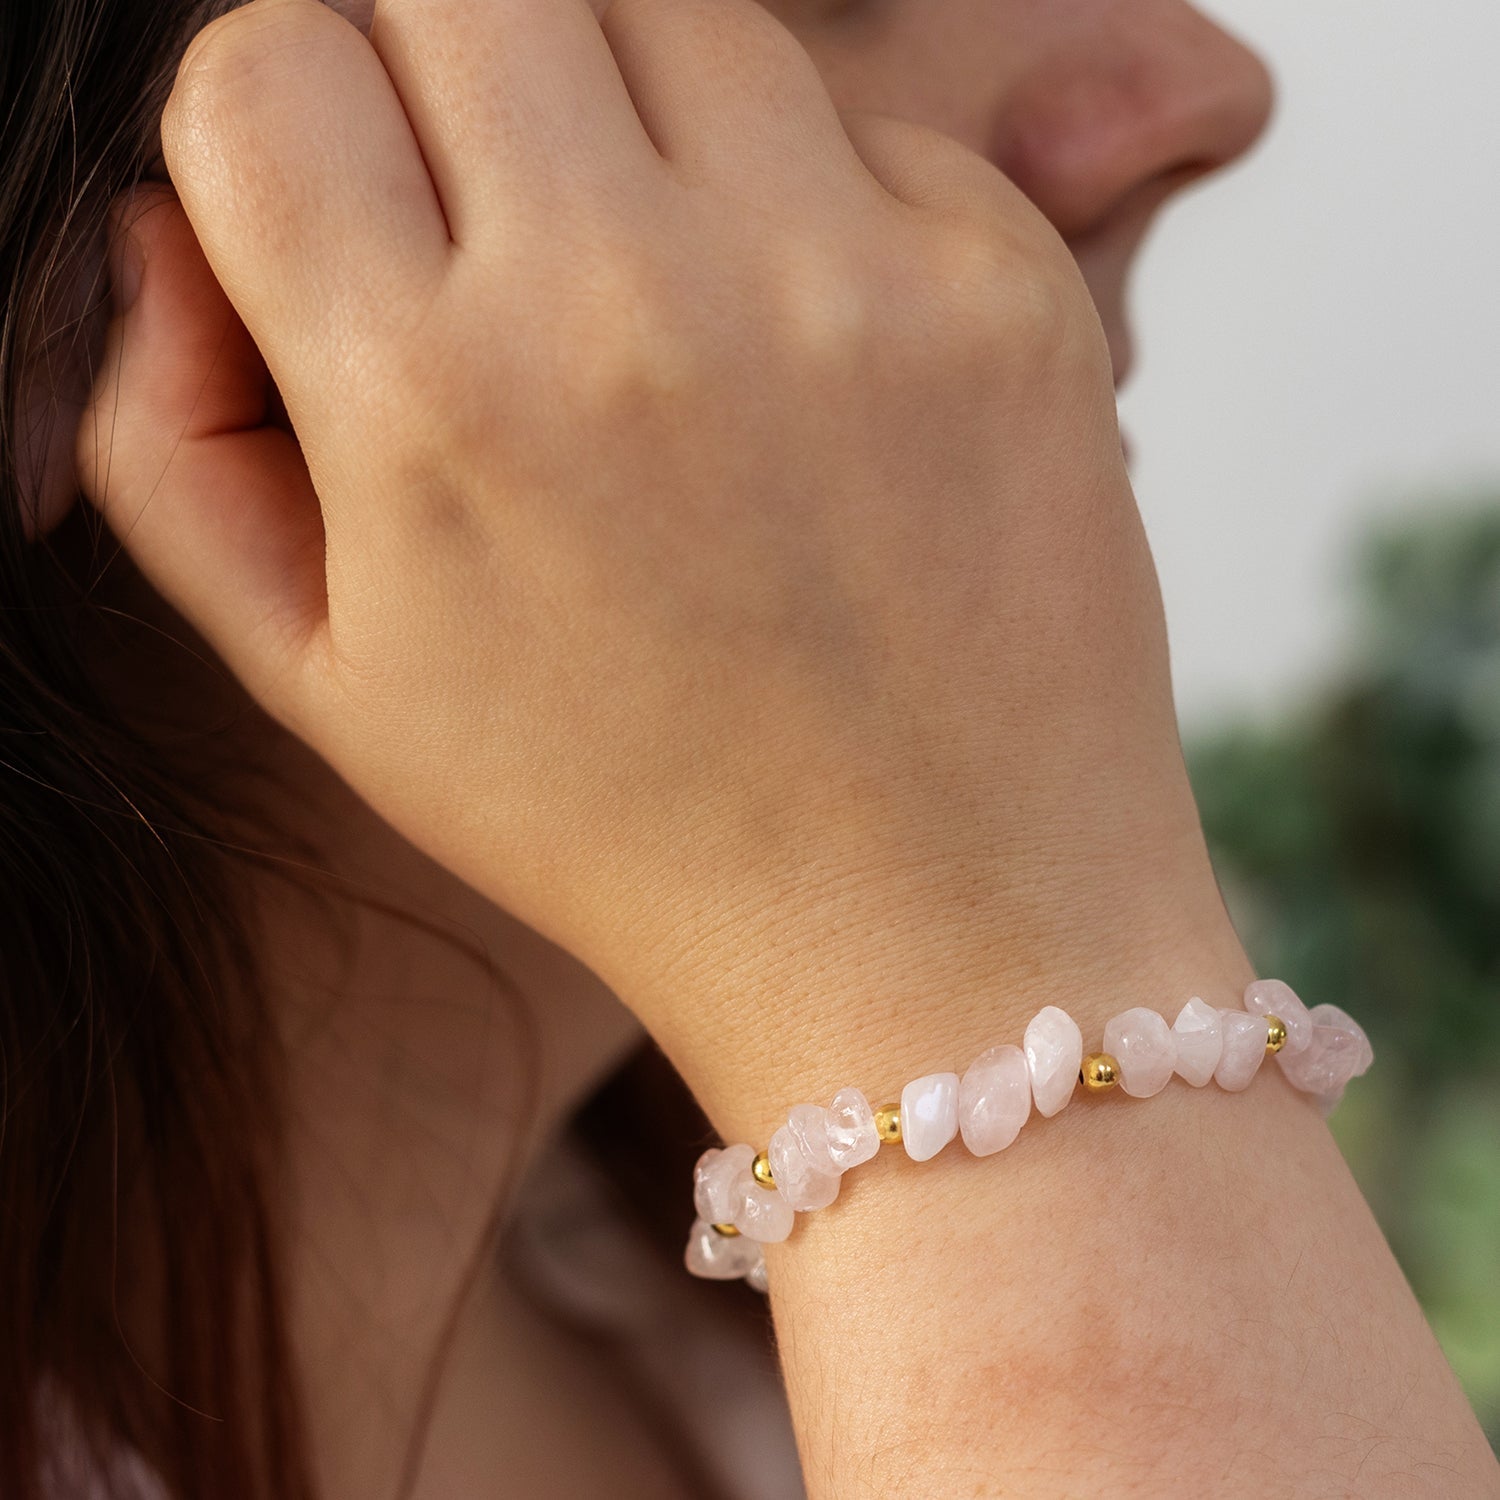 A person with long brown hair wears a bracelet made of irregularly shaped rose quartz beads. As they raise their hand near their face, the softly blurred greenery in the background highlights this exquisite piece of October birthstone jewellery